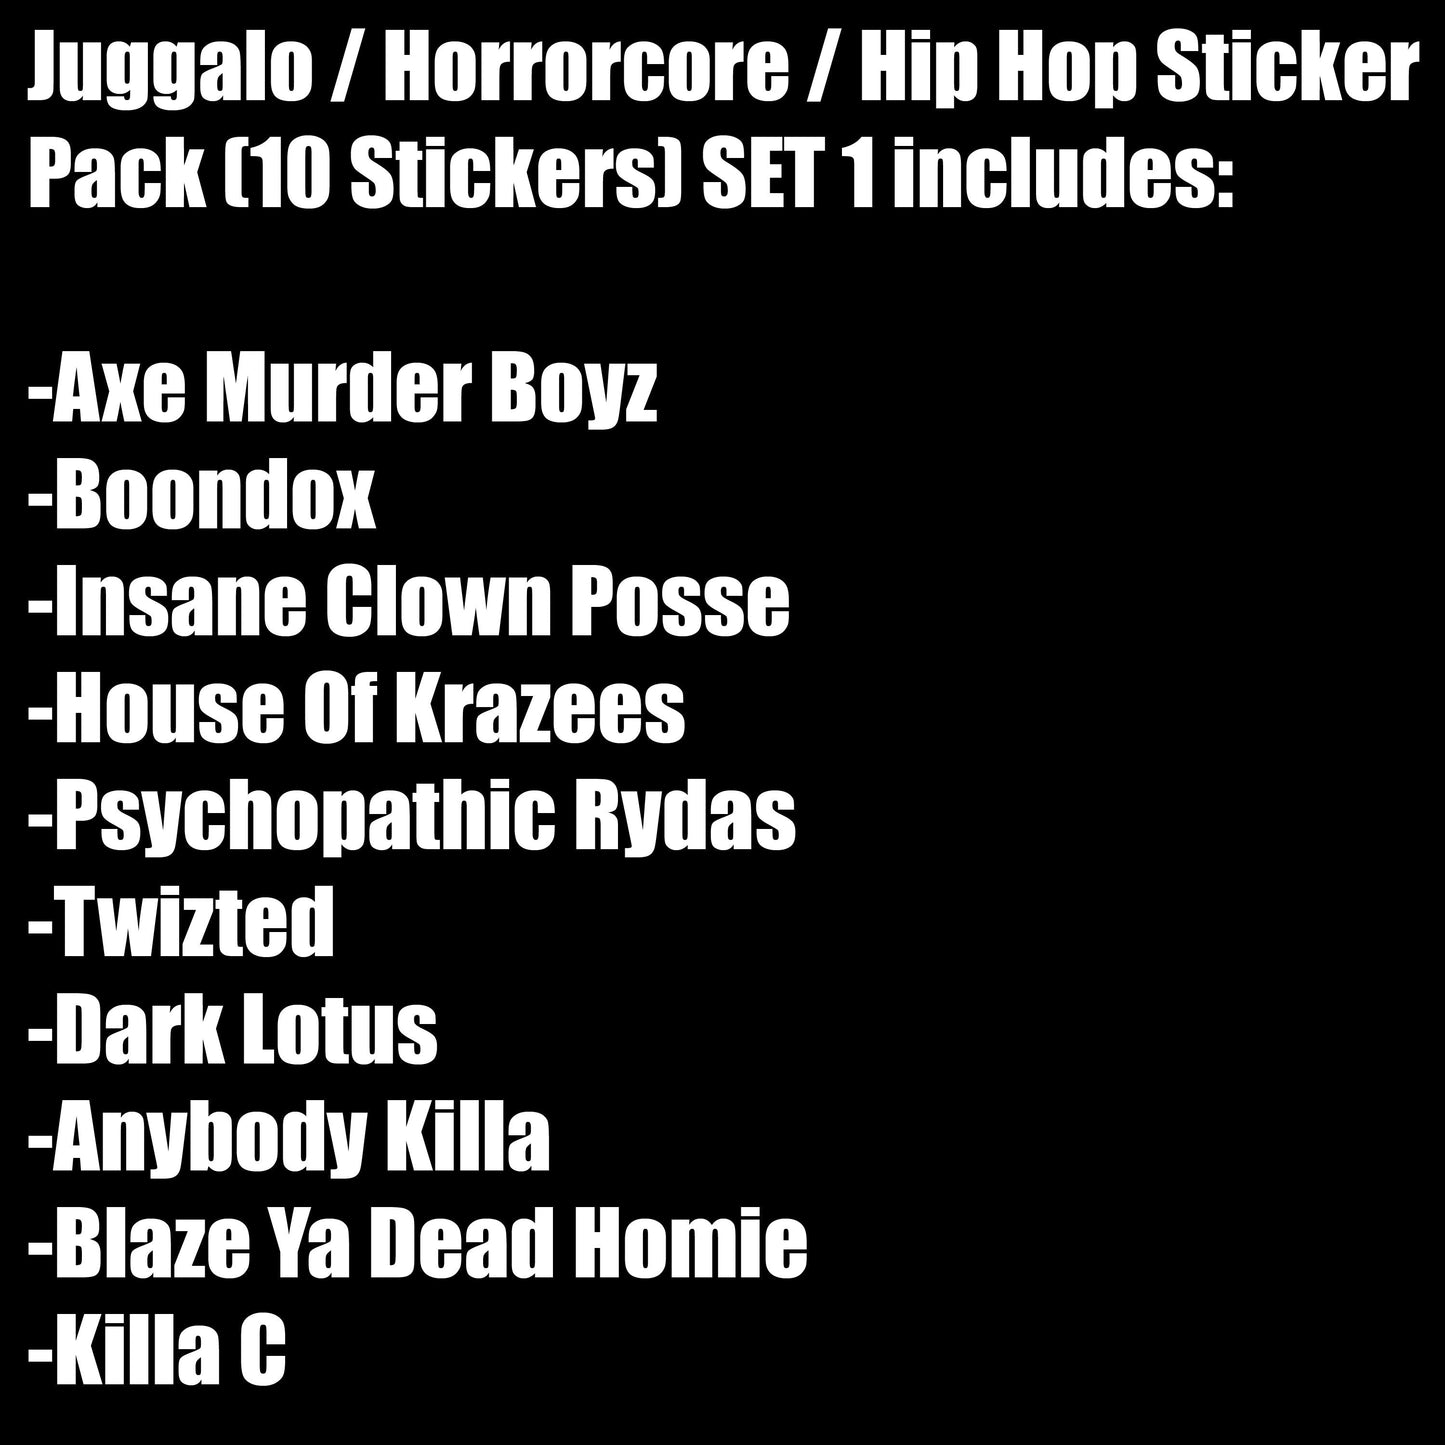 Juggalo / Horrorcore / Hip Hop Sticker Pack (10 Stickers) SET 1